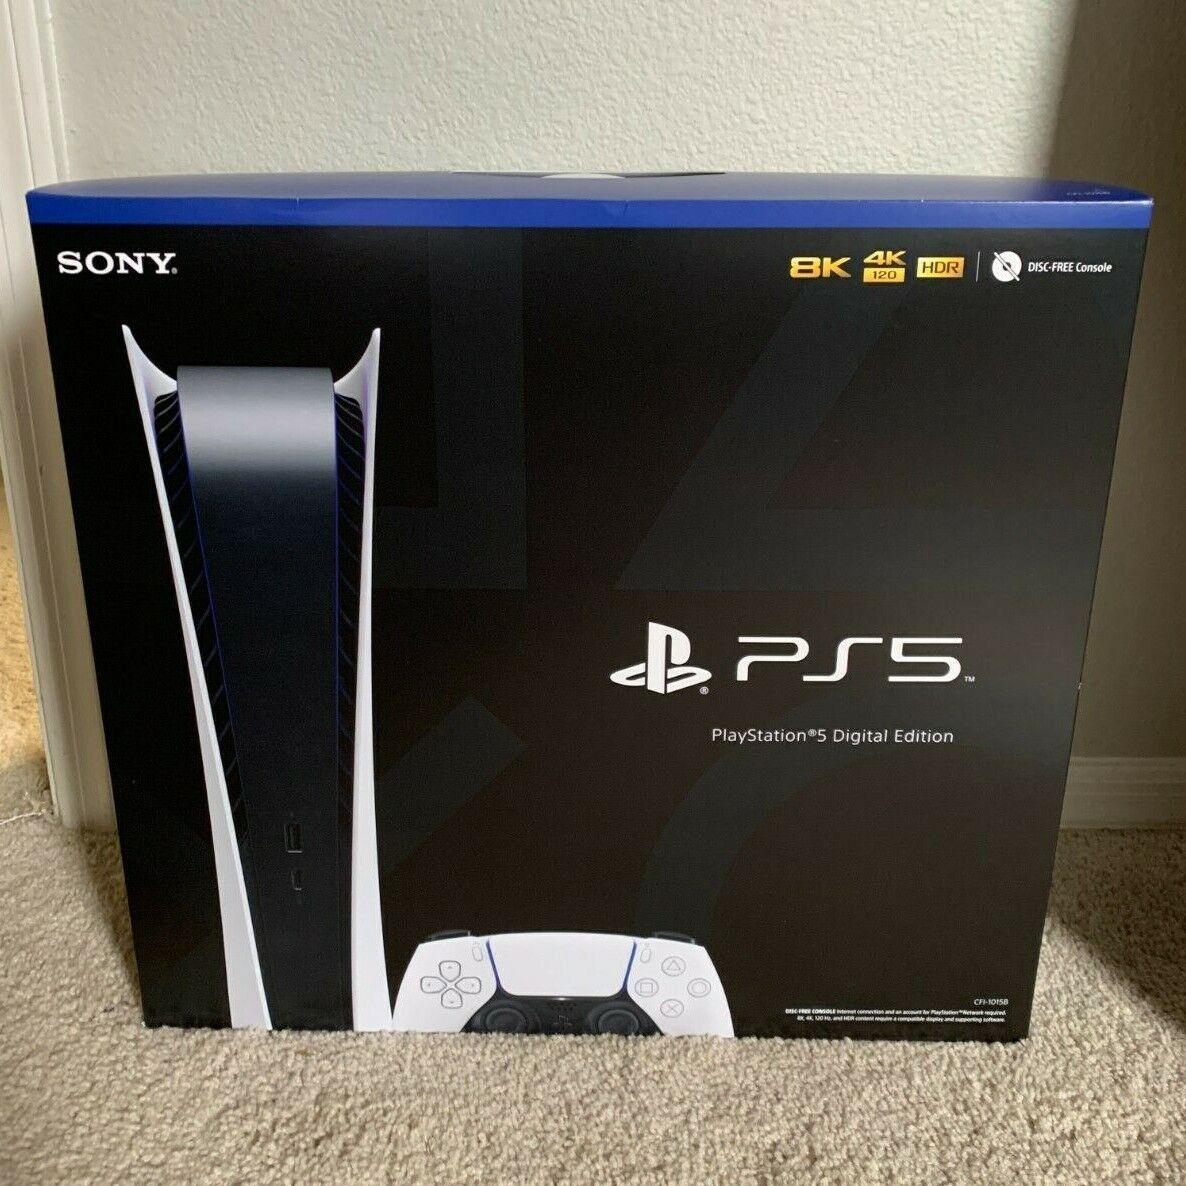 Sony PS5 PlayStation 5 Digital Edition Console - Ships NEXT DAY! on eBay